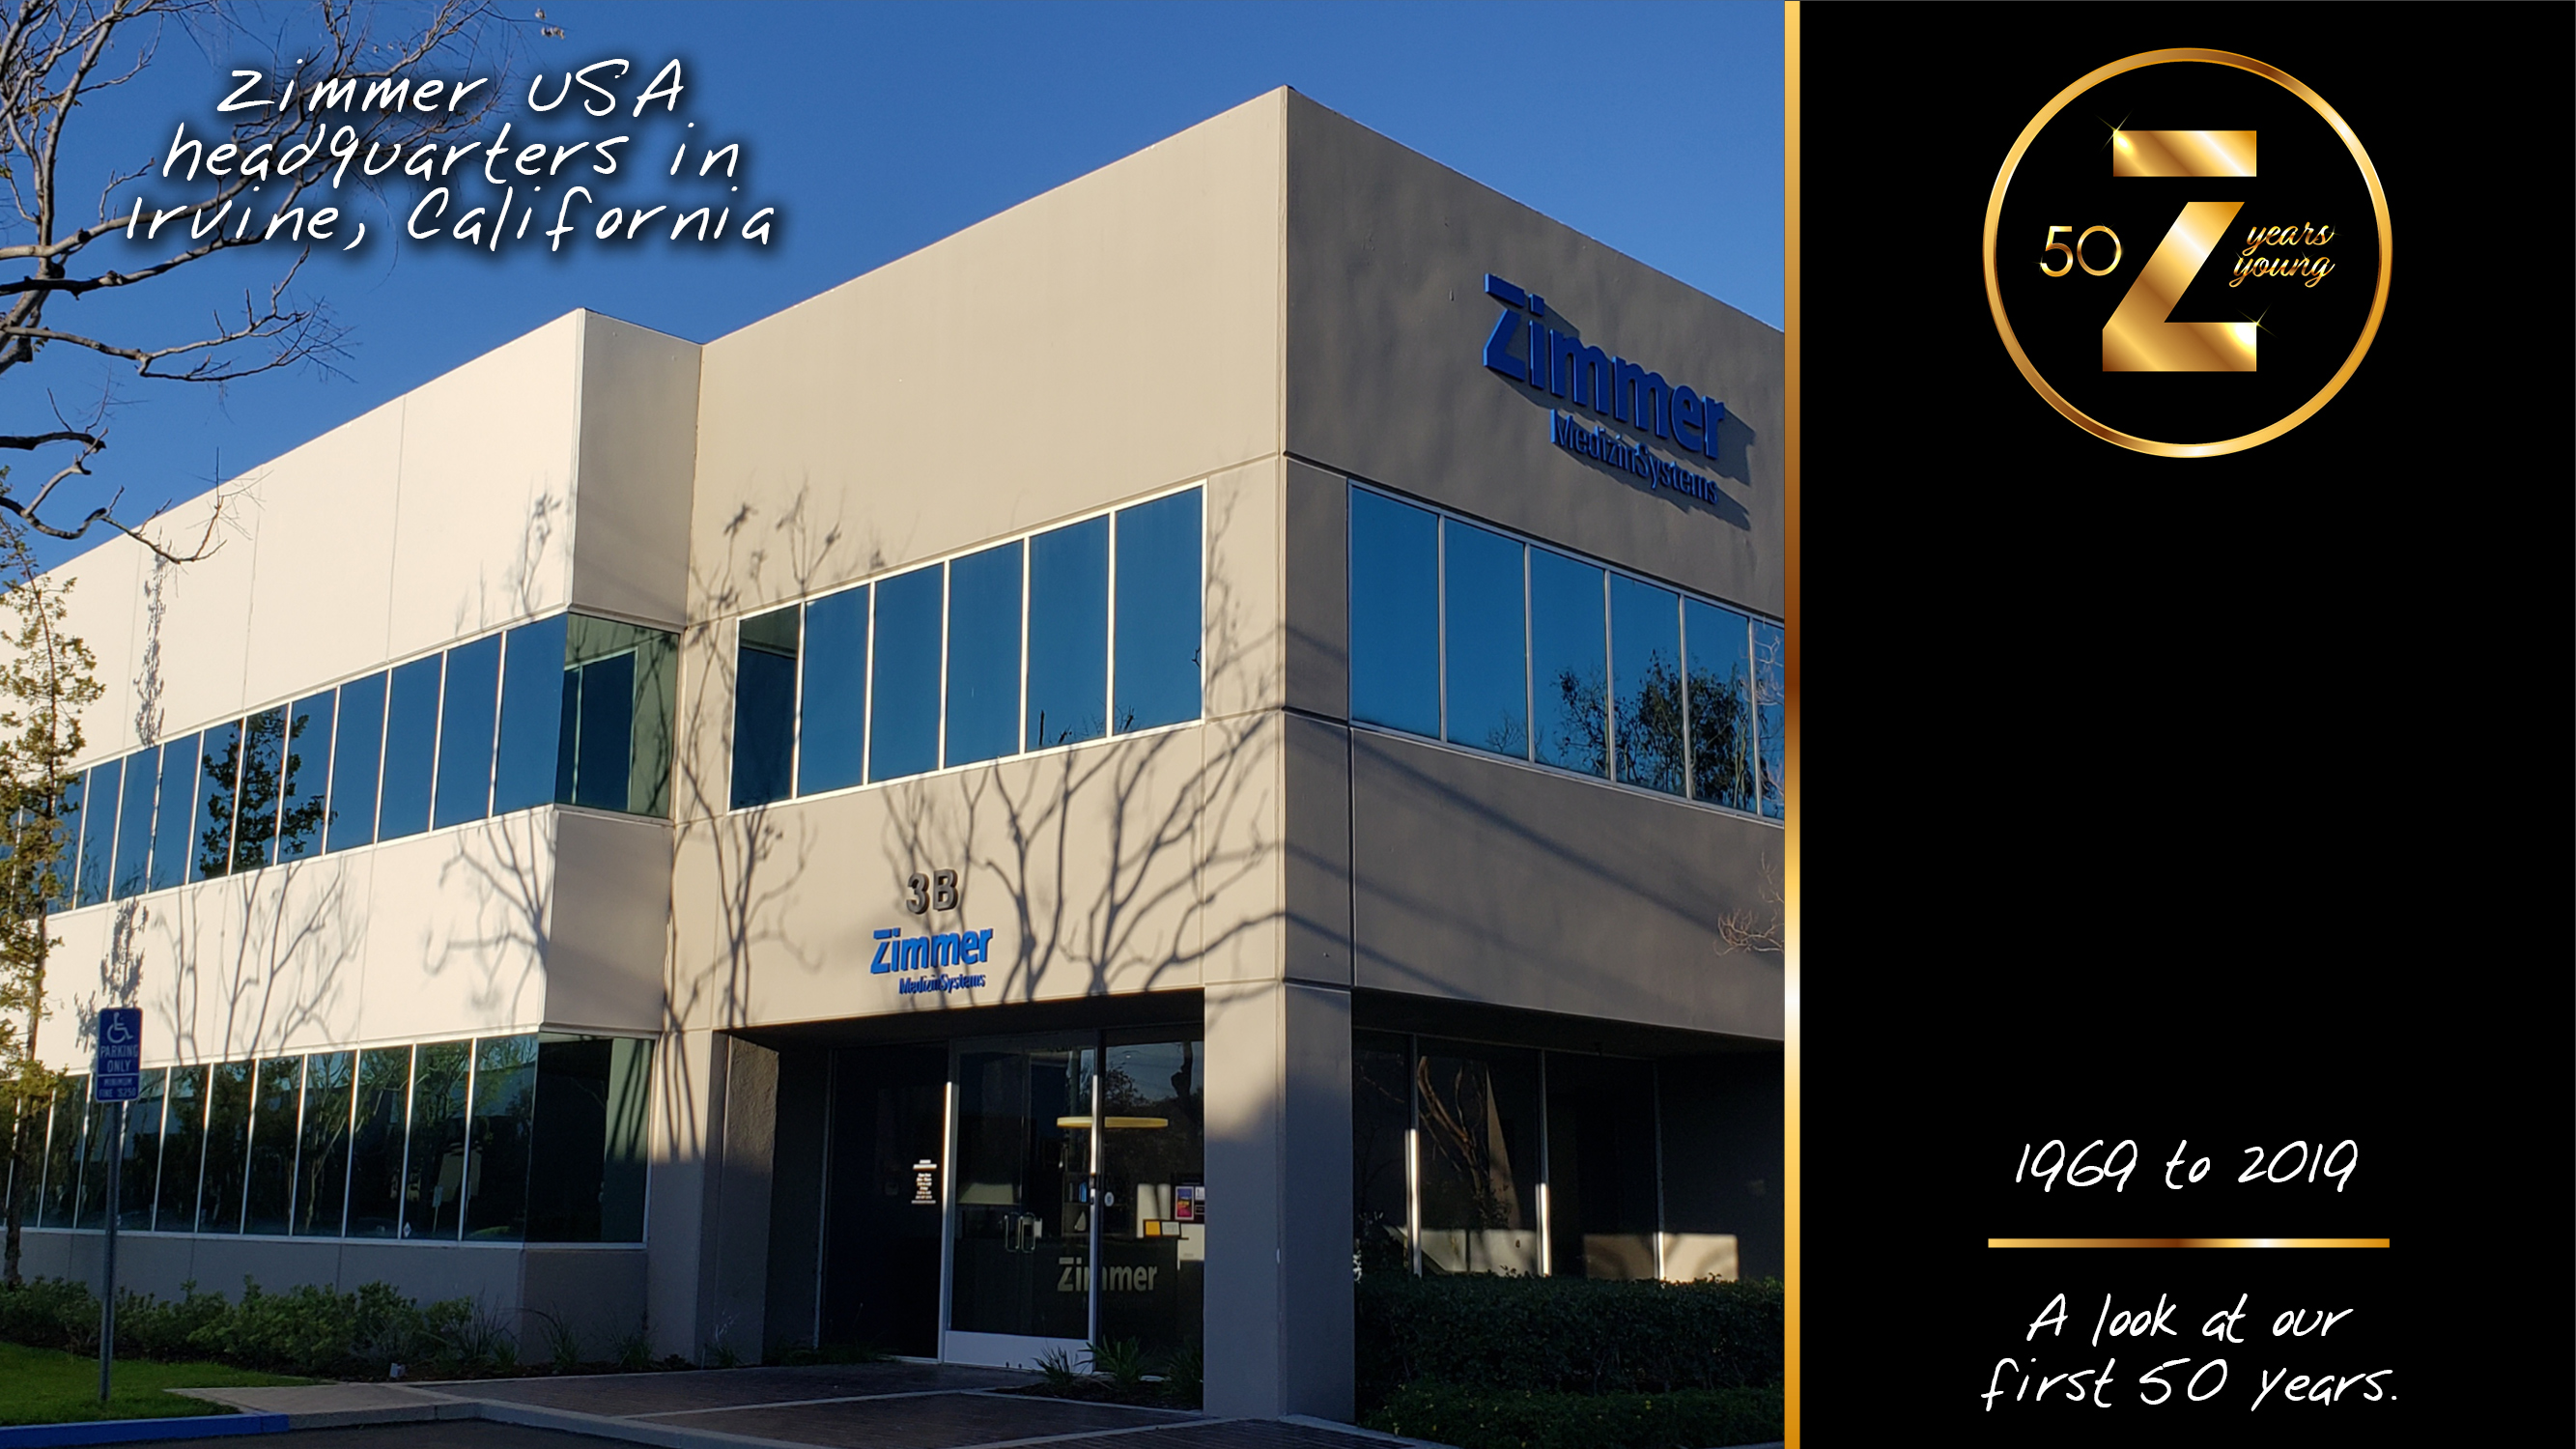 Zimmer Celebrates 50 Years Young -  Irvine, California headquarters of Zimmer USA. Zimmer USA’s headquarters relocated to this larger building in 2018 to accommodate the growth of its business.